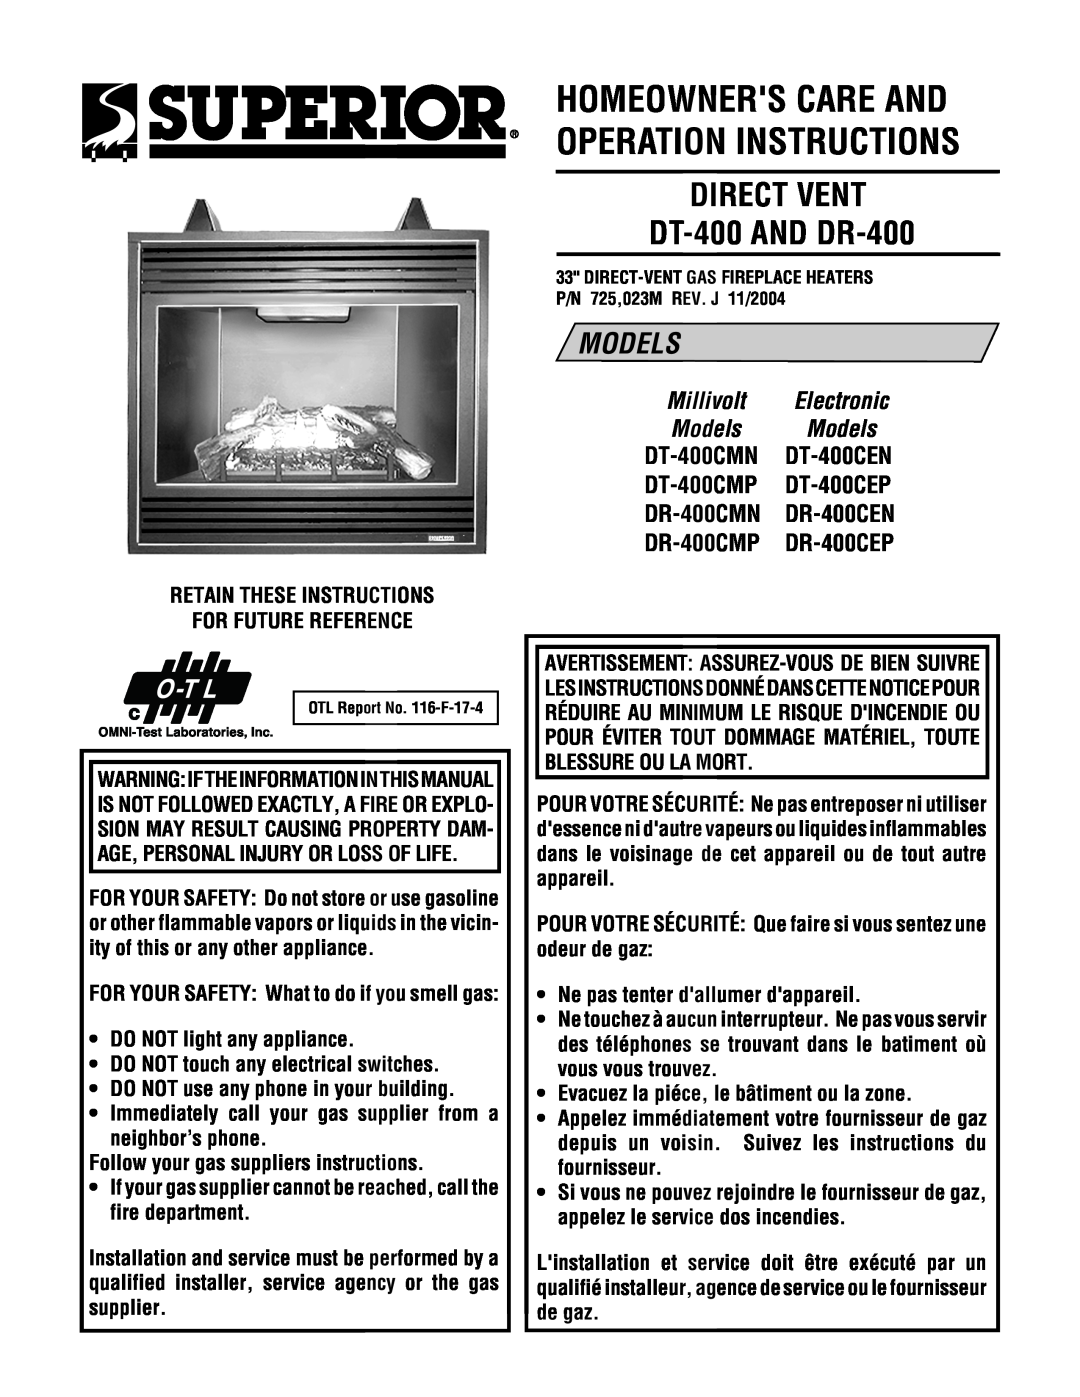 Superior NEC004-TD, NMC004-TD manual DIRECT VENT DT-400AND DR-400, Homeowners Care And Operation Instructions, Models 